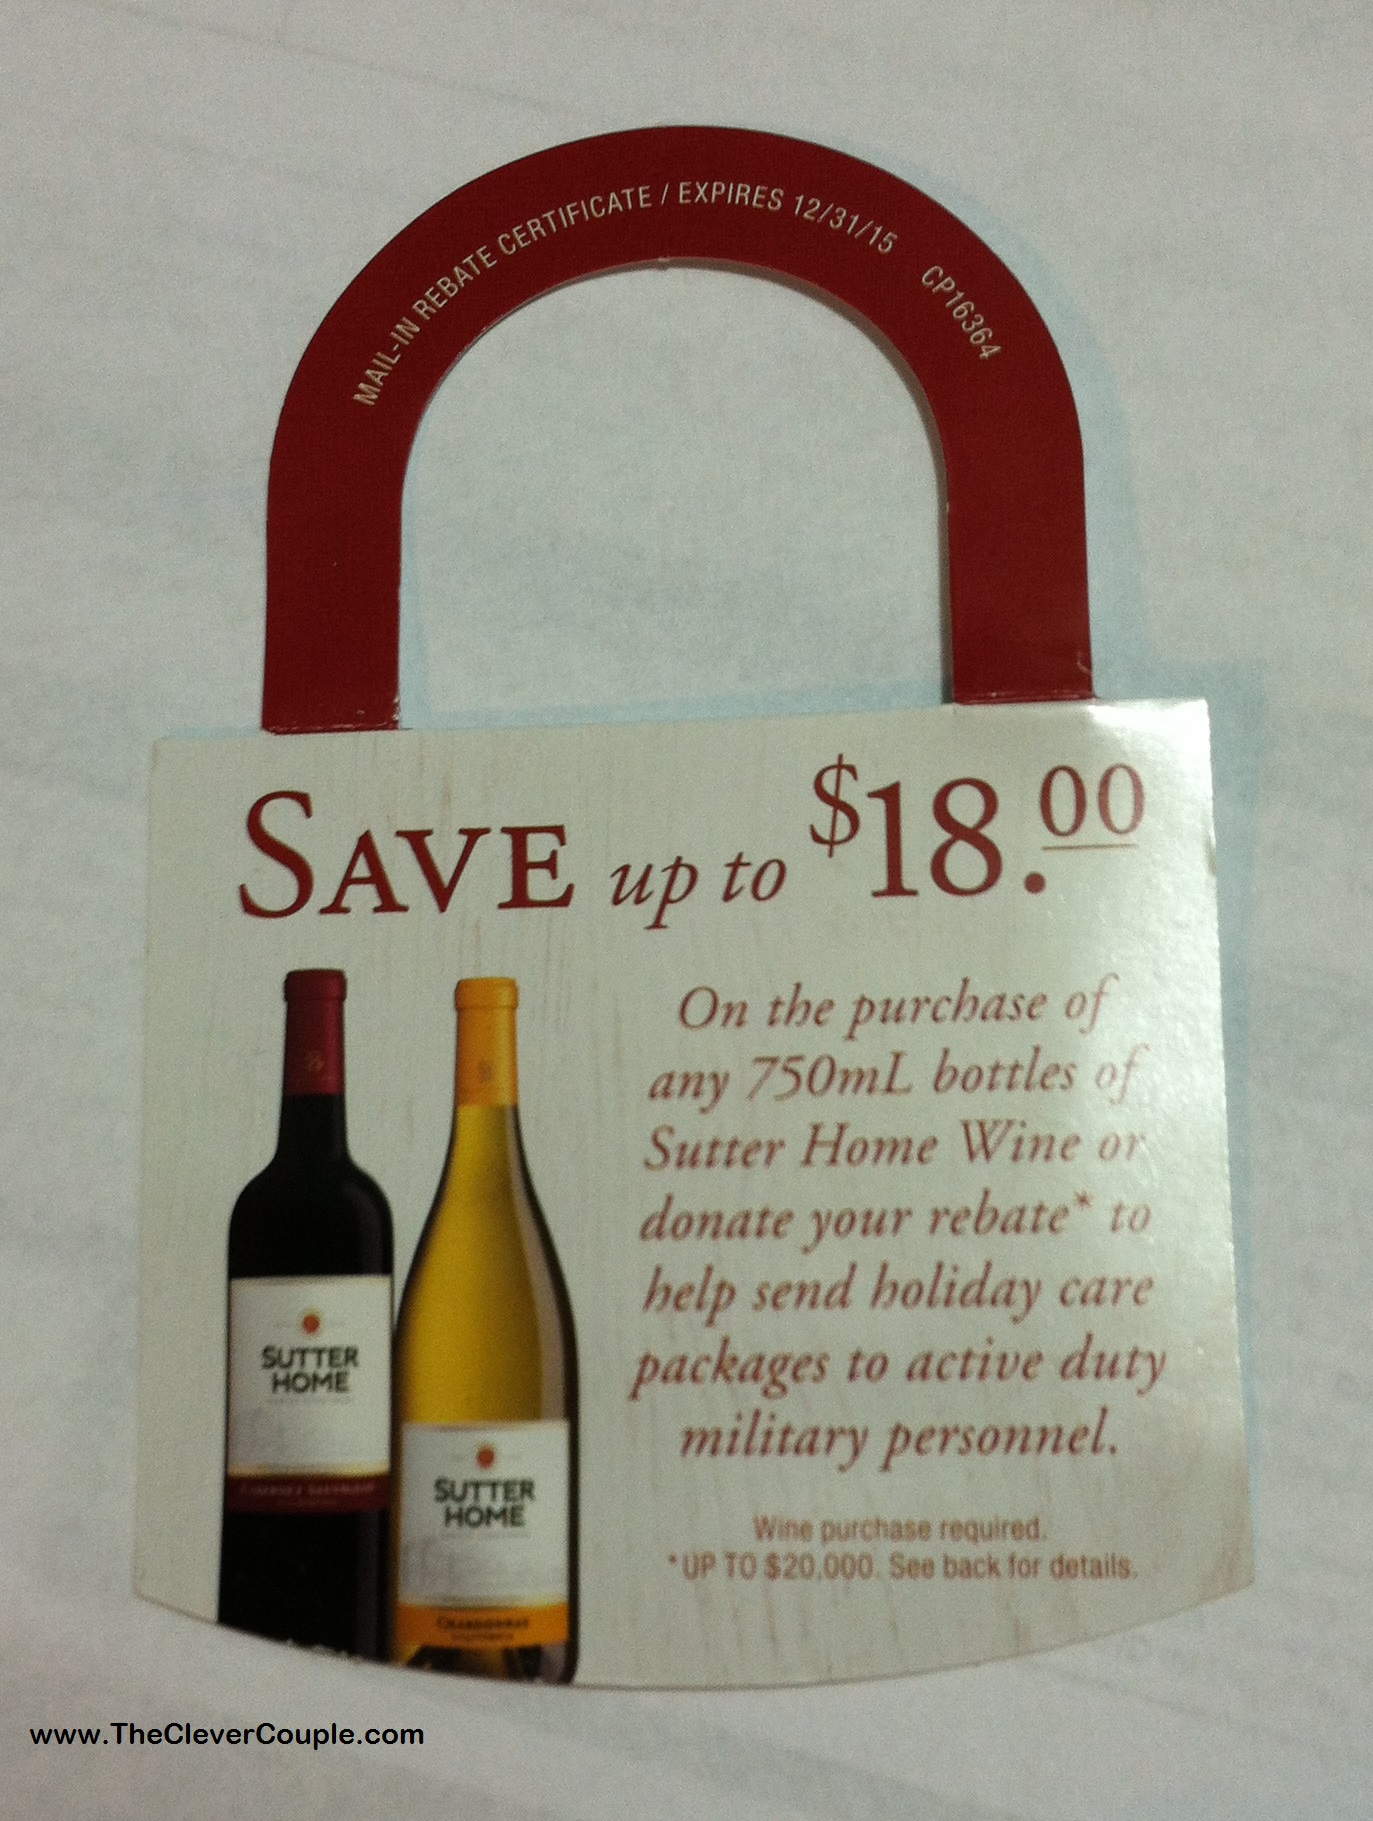 sutter-home-wine-rebate-save-up-to-18-the-clever-couple